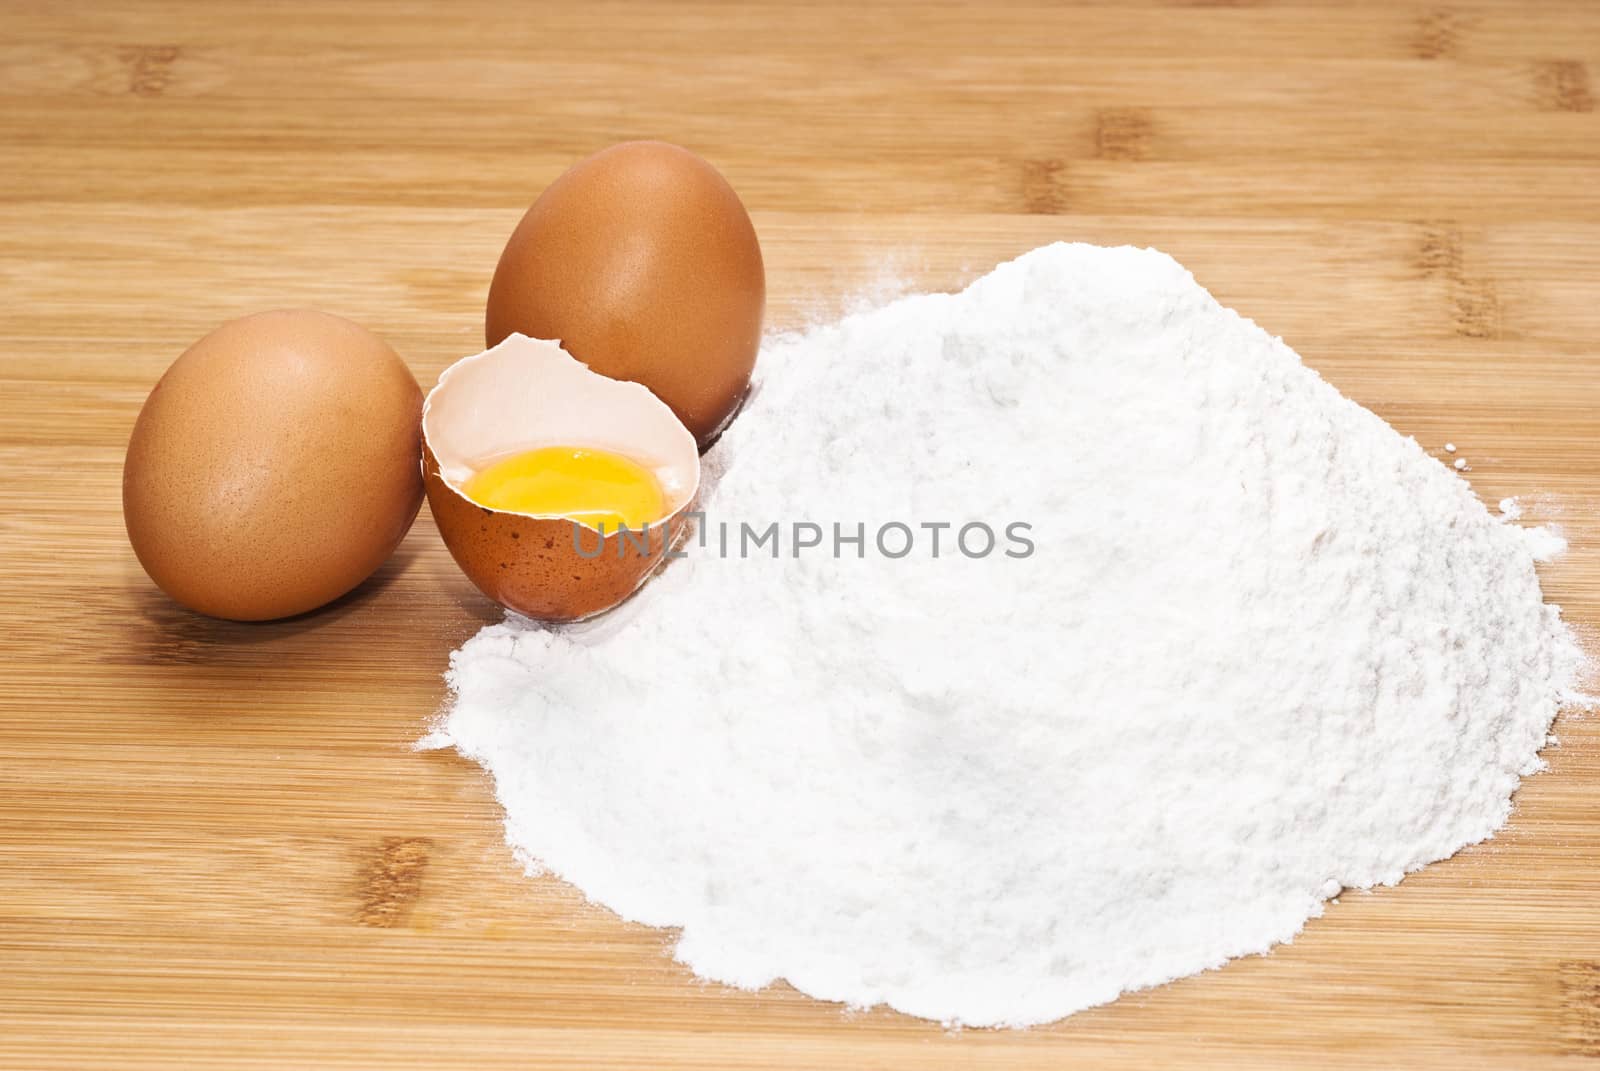 Eggs and flour. preparation of pasta on wooden table